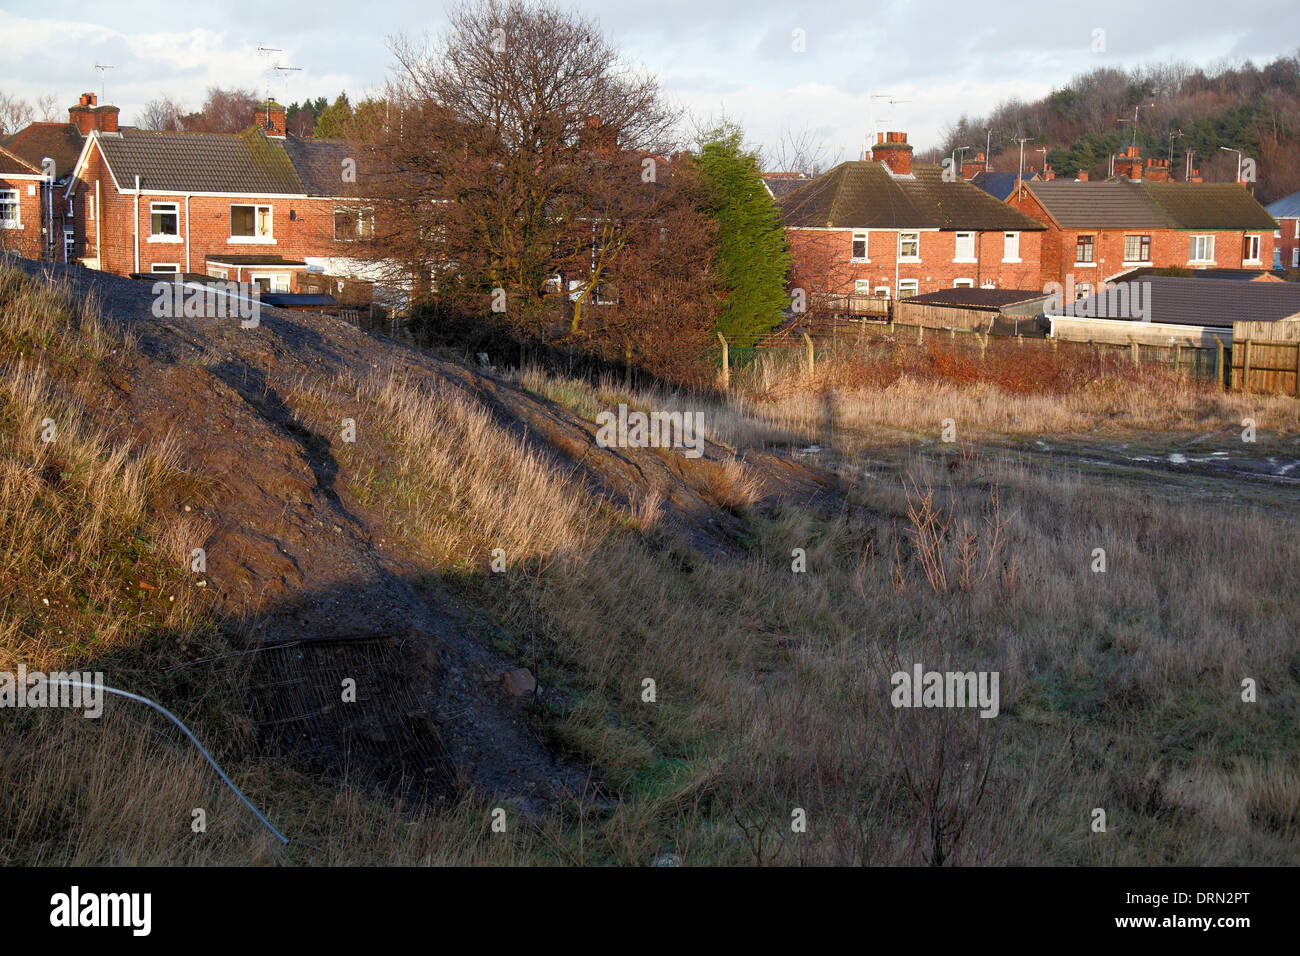 What appears to be spoils on the former site of Ollerton Colliery adjacent residential housing, New Ollerton,Nottinghamshire, UK Stock Photo